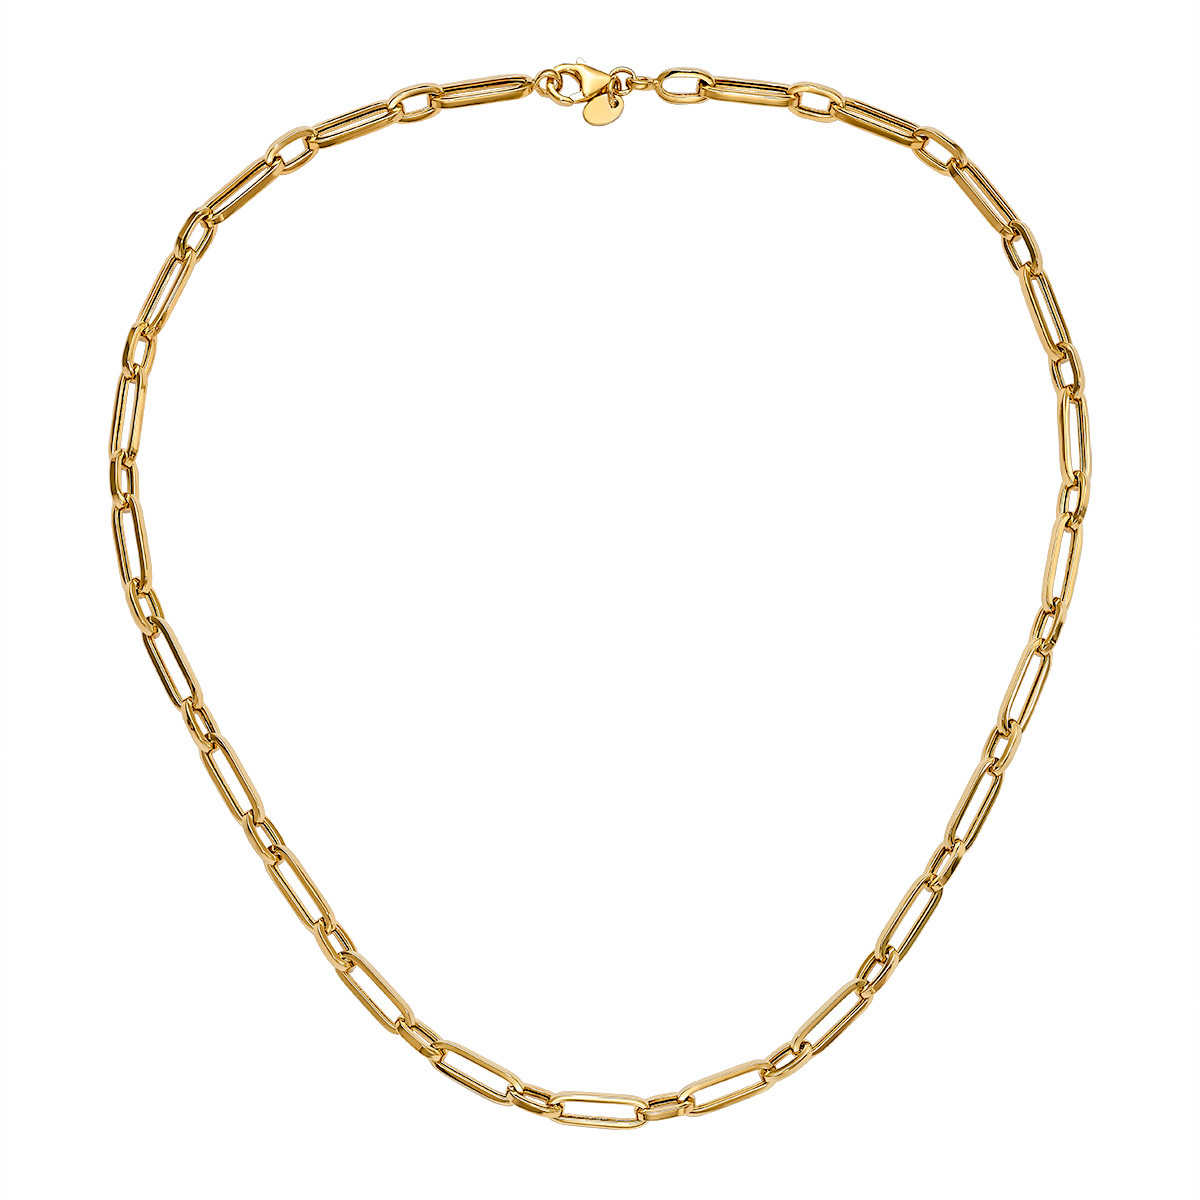 Luxurman 14K Two-Tone White Yellow Solid Gold Diamond Cut Singapore Chain Anklet Bracelet Necklace